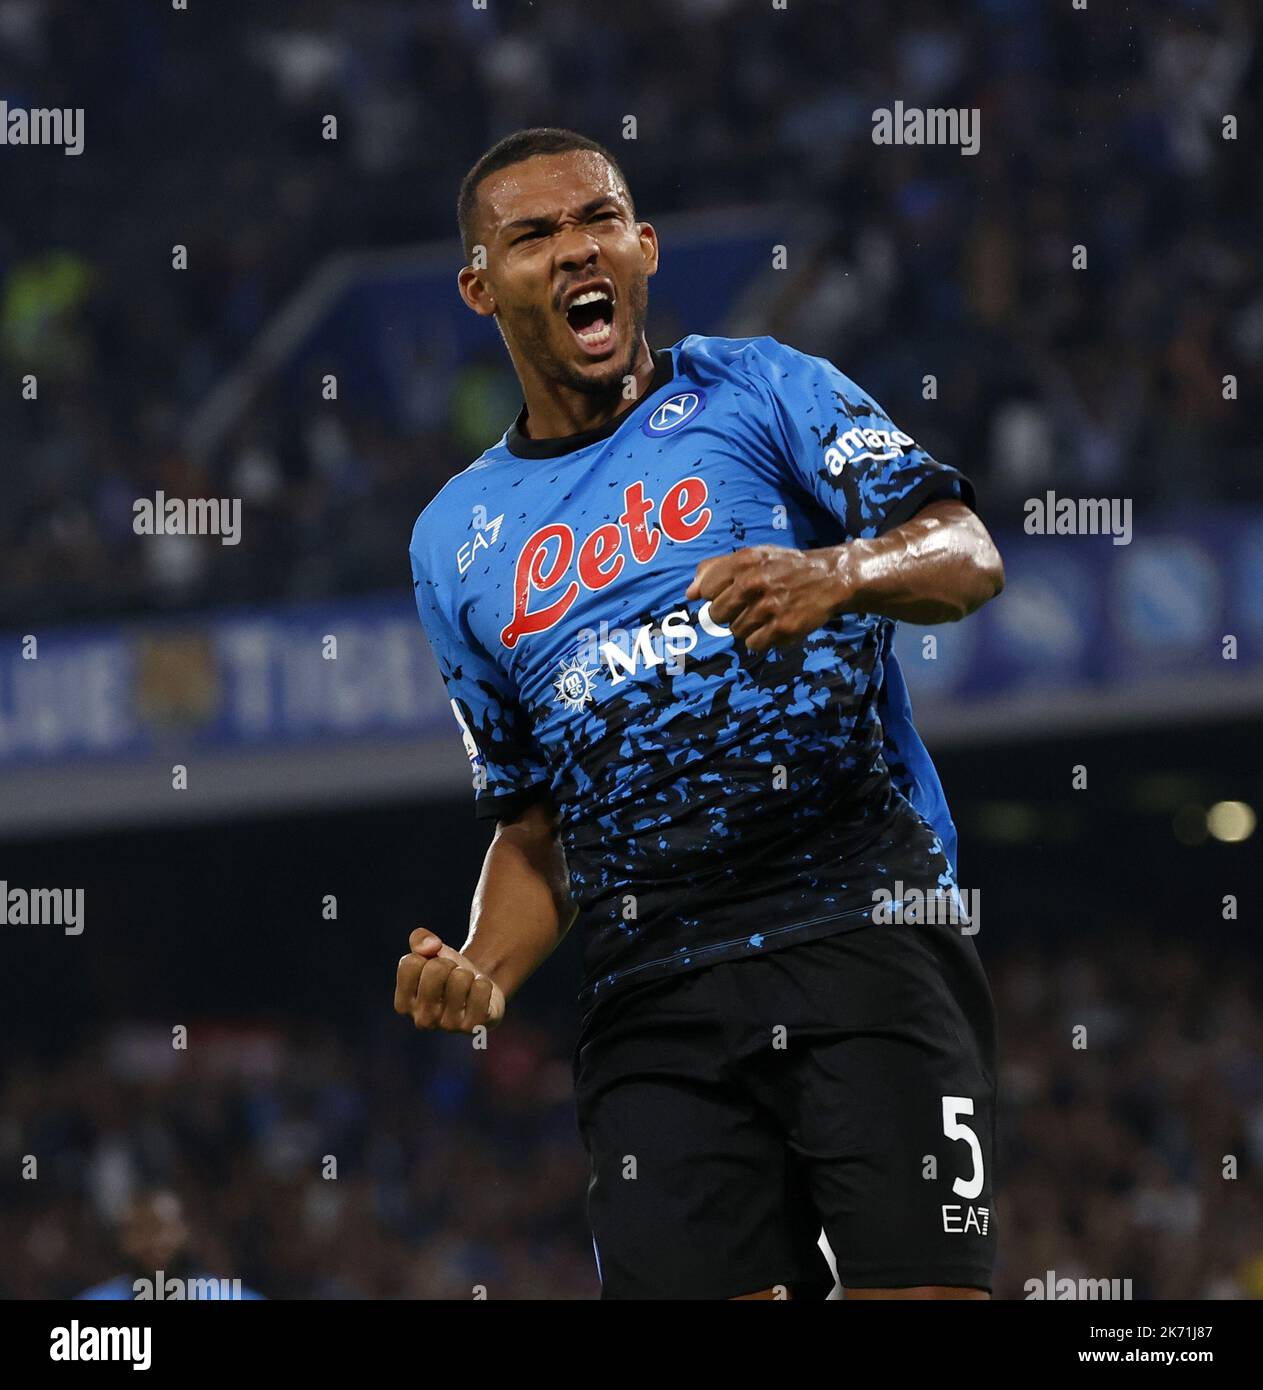 Naples, Italy. 16th Oct, 2022. Napoli's Juan Jesus celebrates his goal during a Serie A football match between Napoli and Bologna in Naples, Italy, Oct. 16, 2022. Credit: Str/Xinhua/Alamy Live News Stock Photo